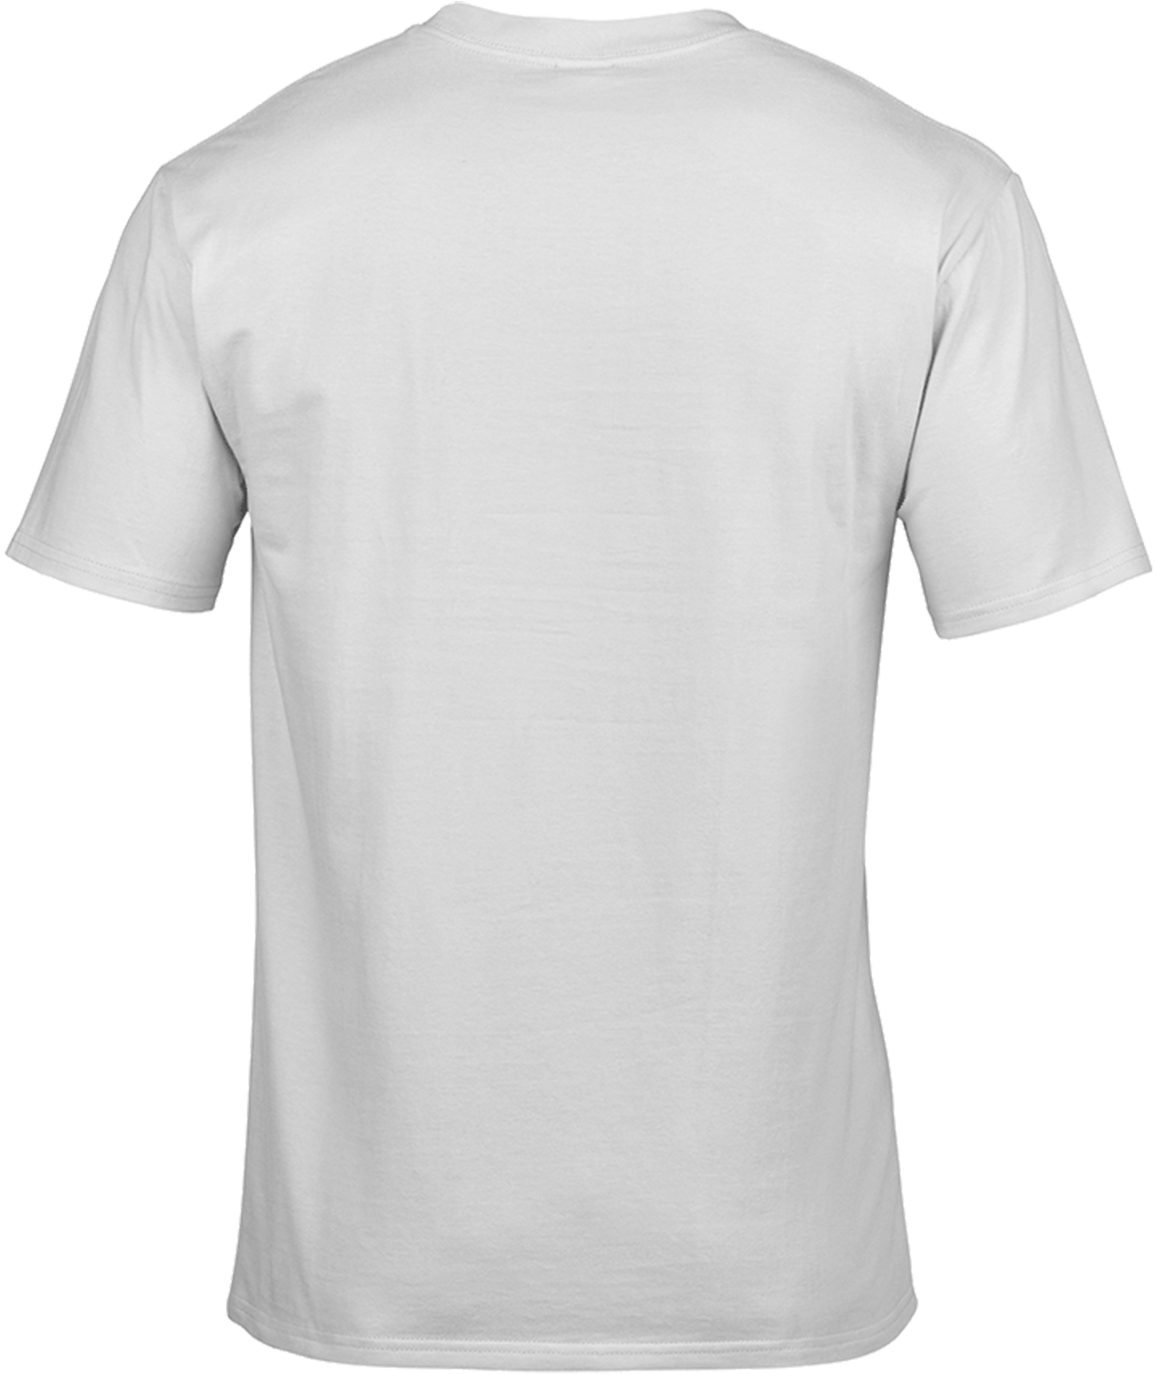 Download White Shirt Back Png PNG Image with No Background - PNGkey.com